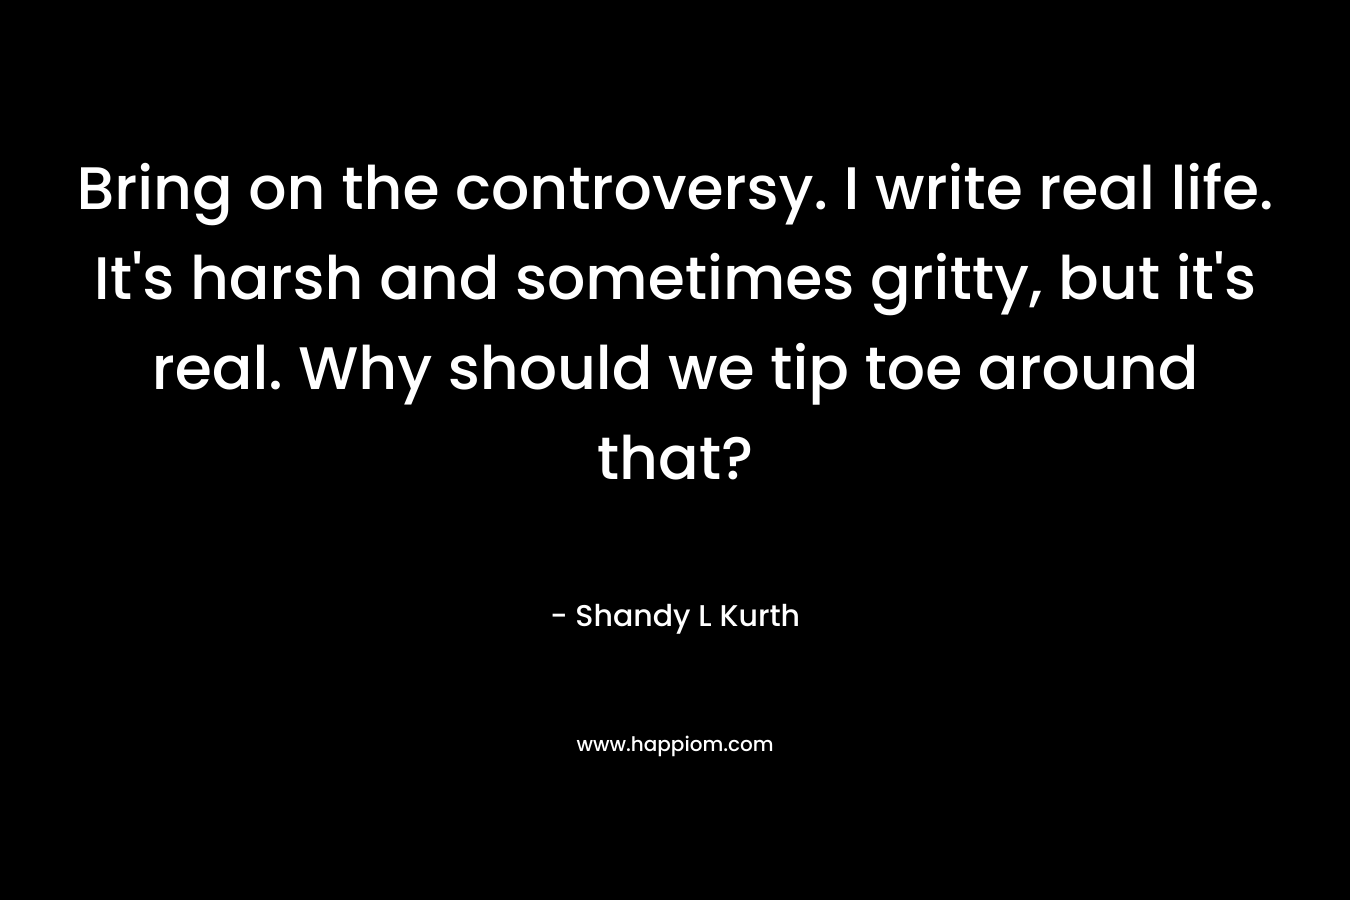 Bring on the controversy. I write real life. It’s harsh and sometimes gritty, but it’s real. Why should we tip toe around that? – Shandy L Kurth